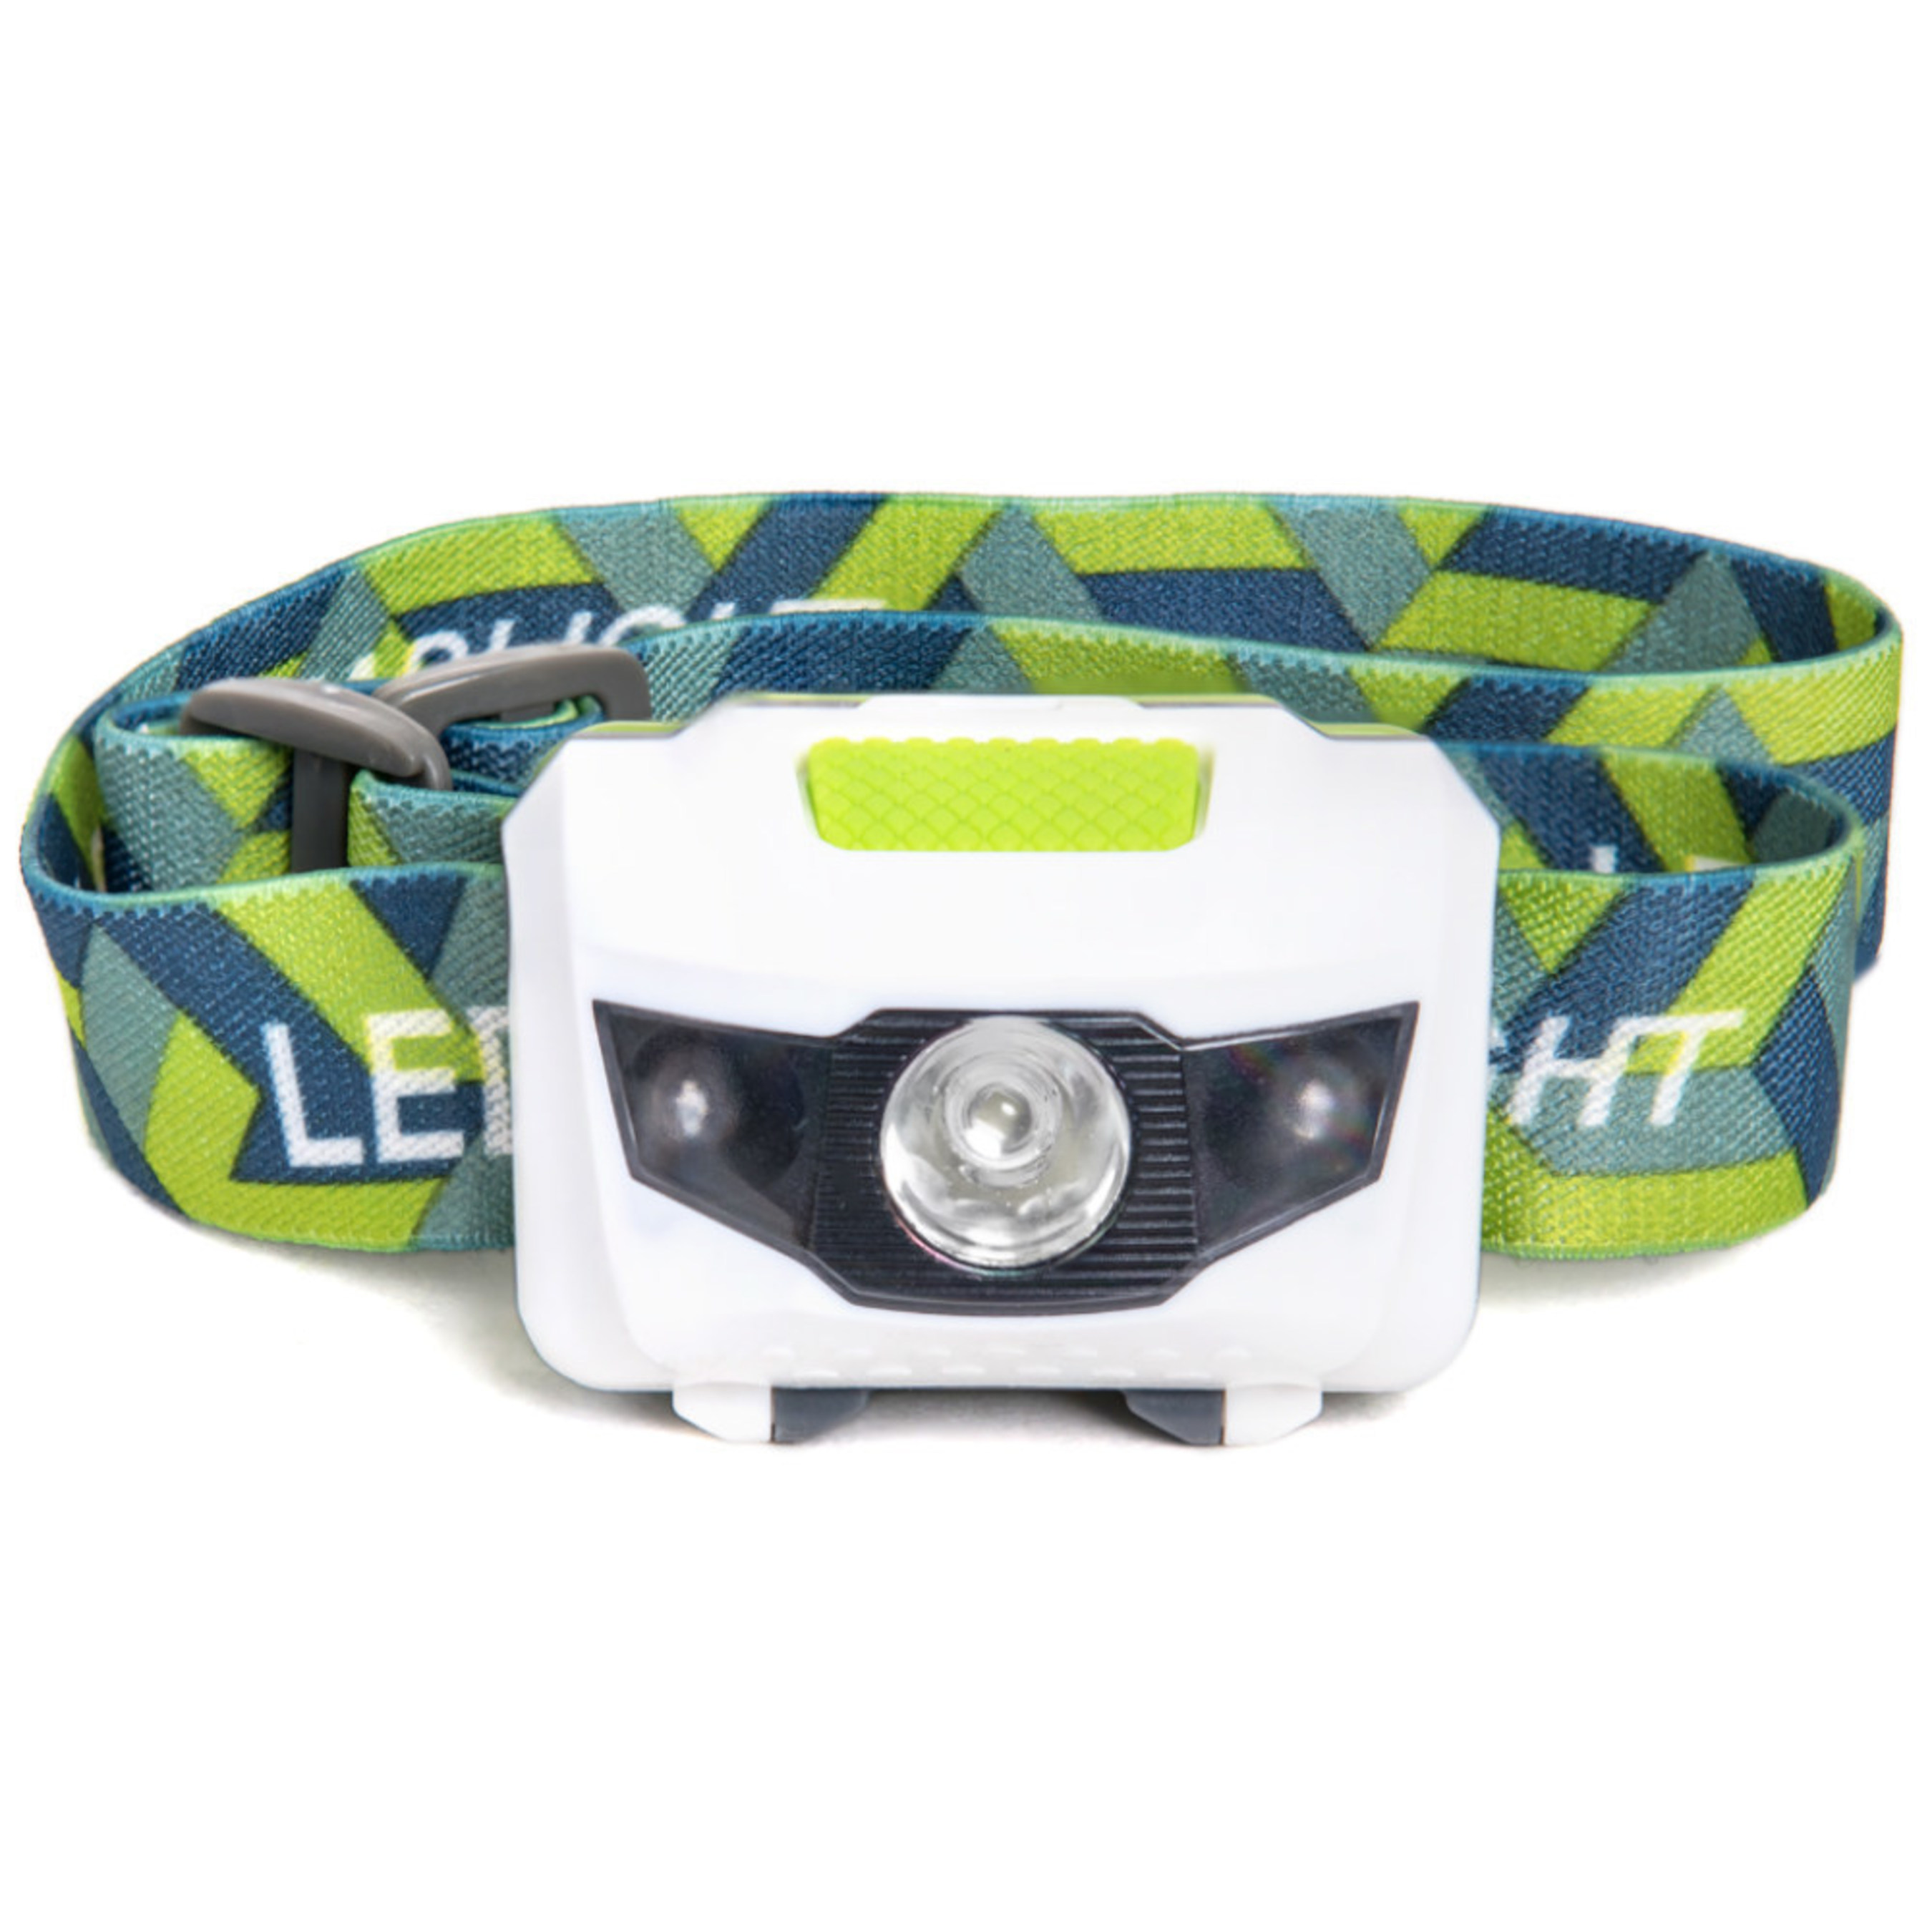 LED Headlamp - Great for Camping, Hiking, Dog Walking, and Kids.